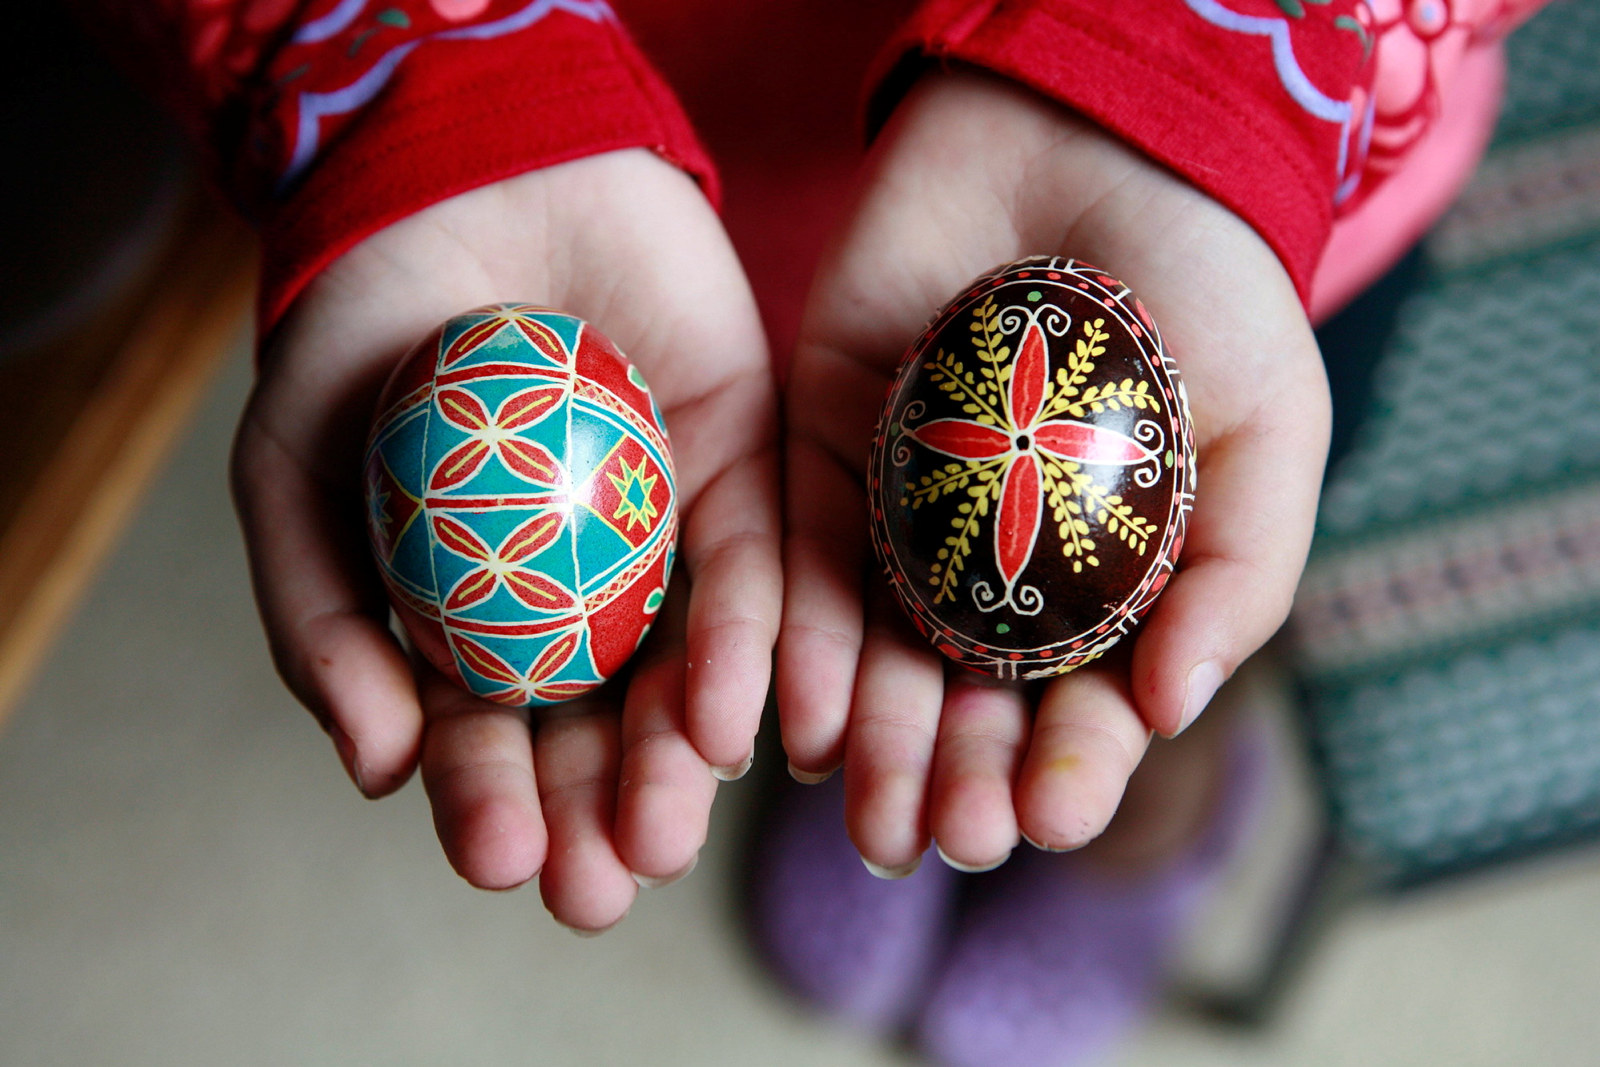 Decorated easter eggs - Rituals and Traditions of Sydney.